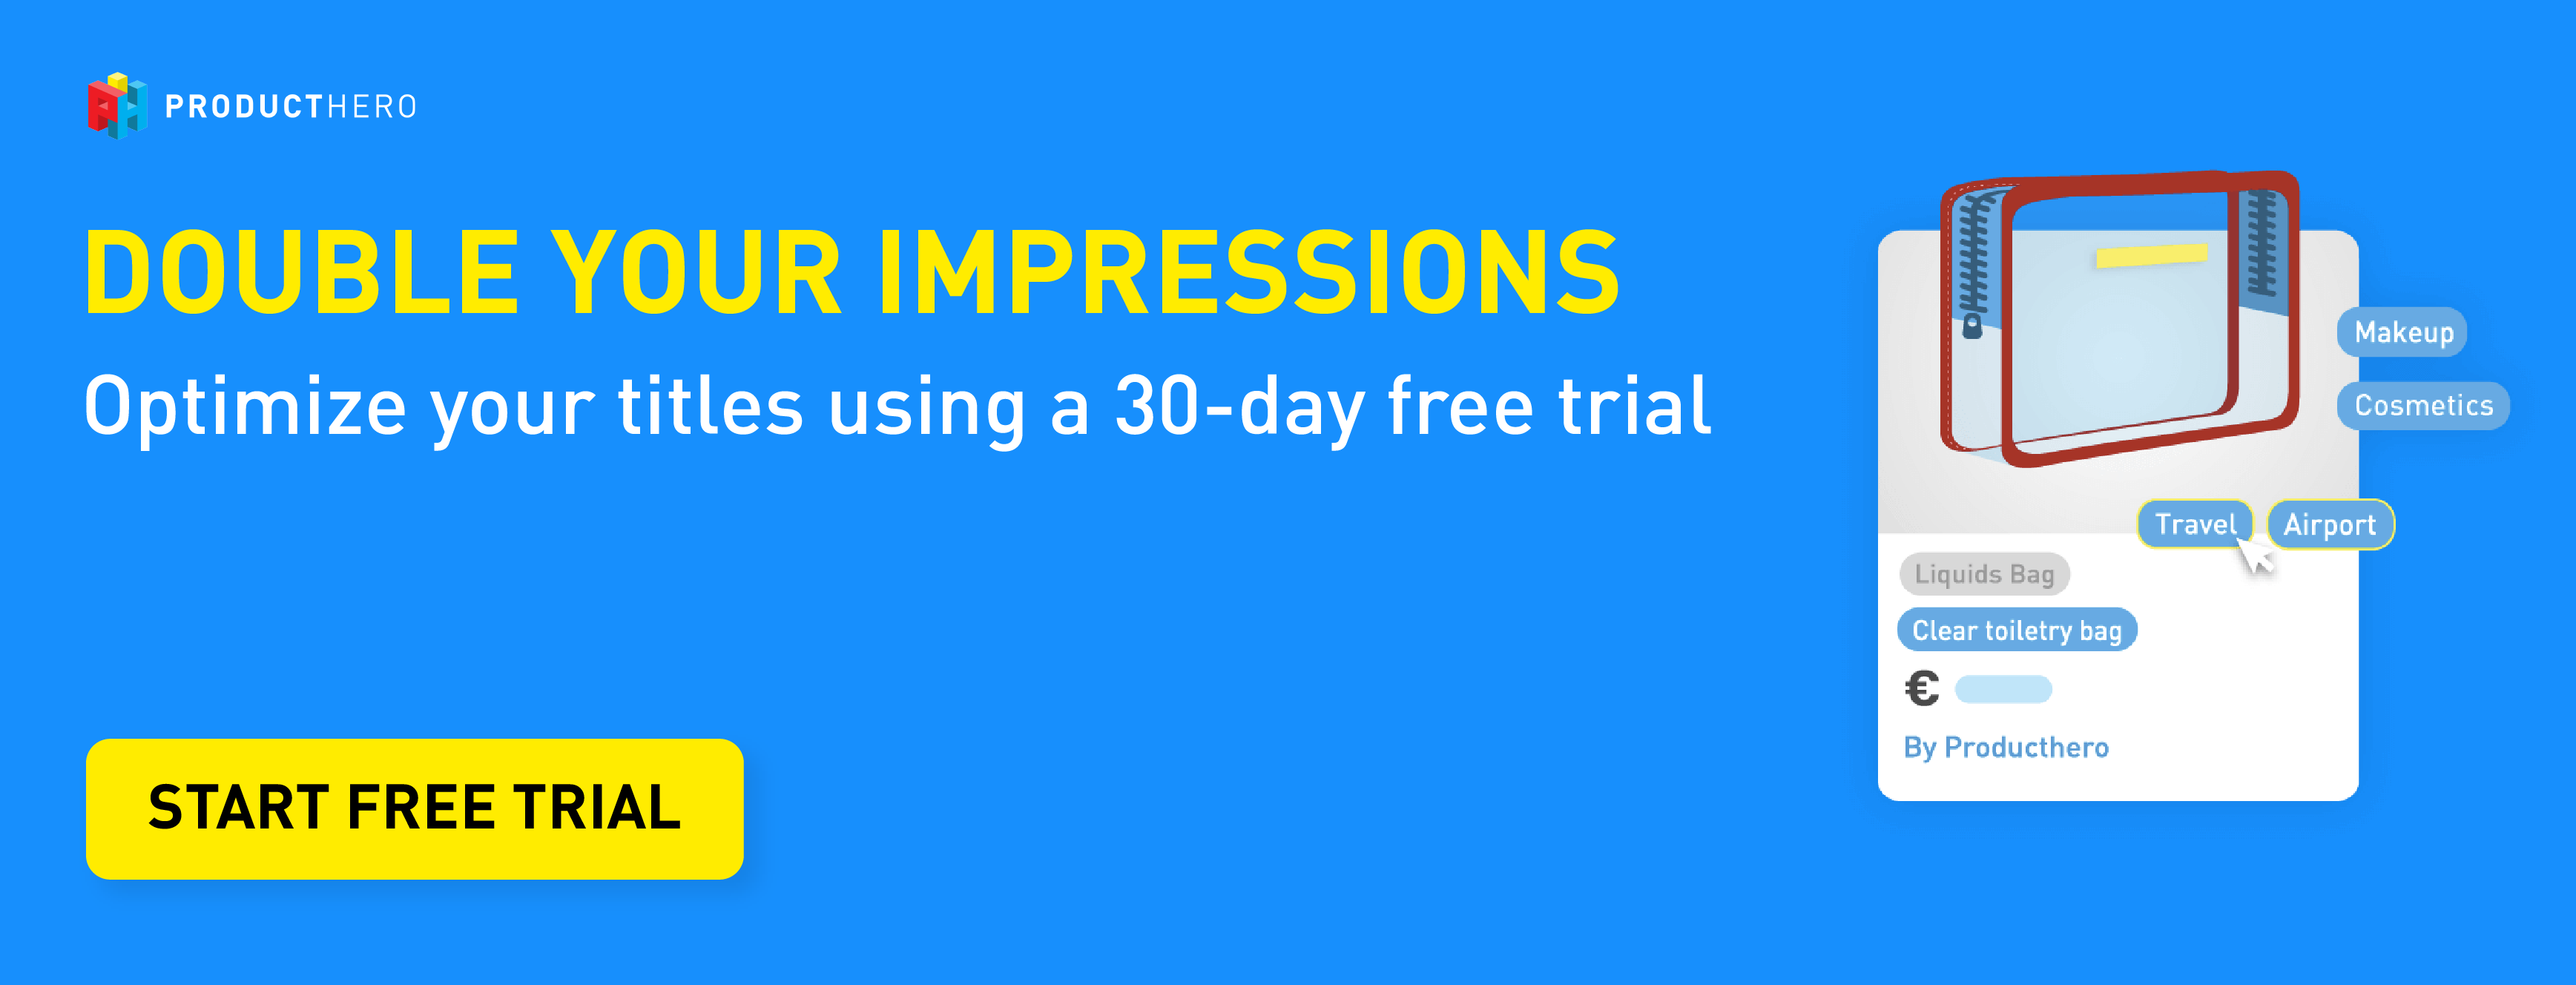 Double your impressions. Optimize your titles using a 30-day free trial